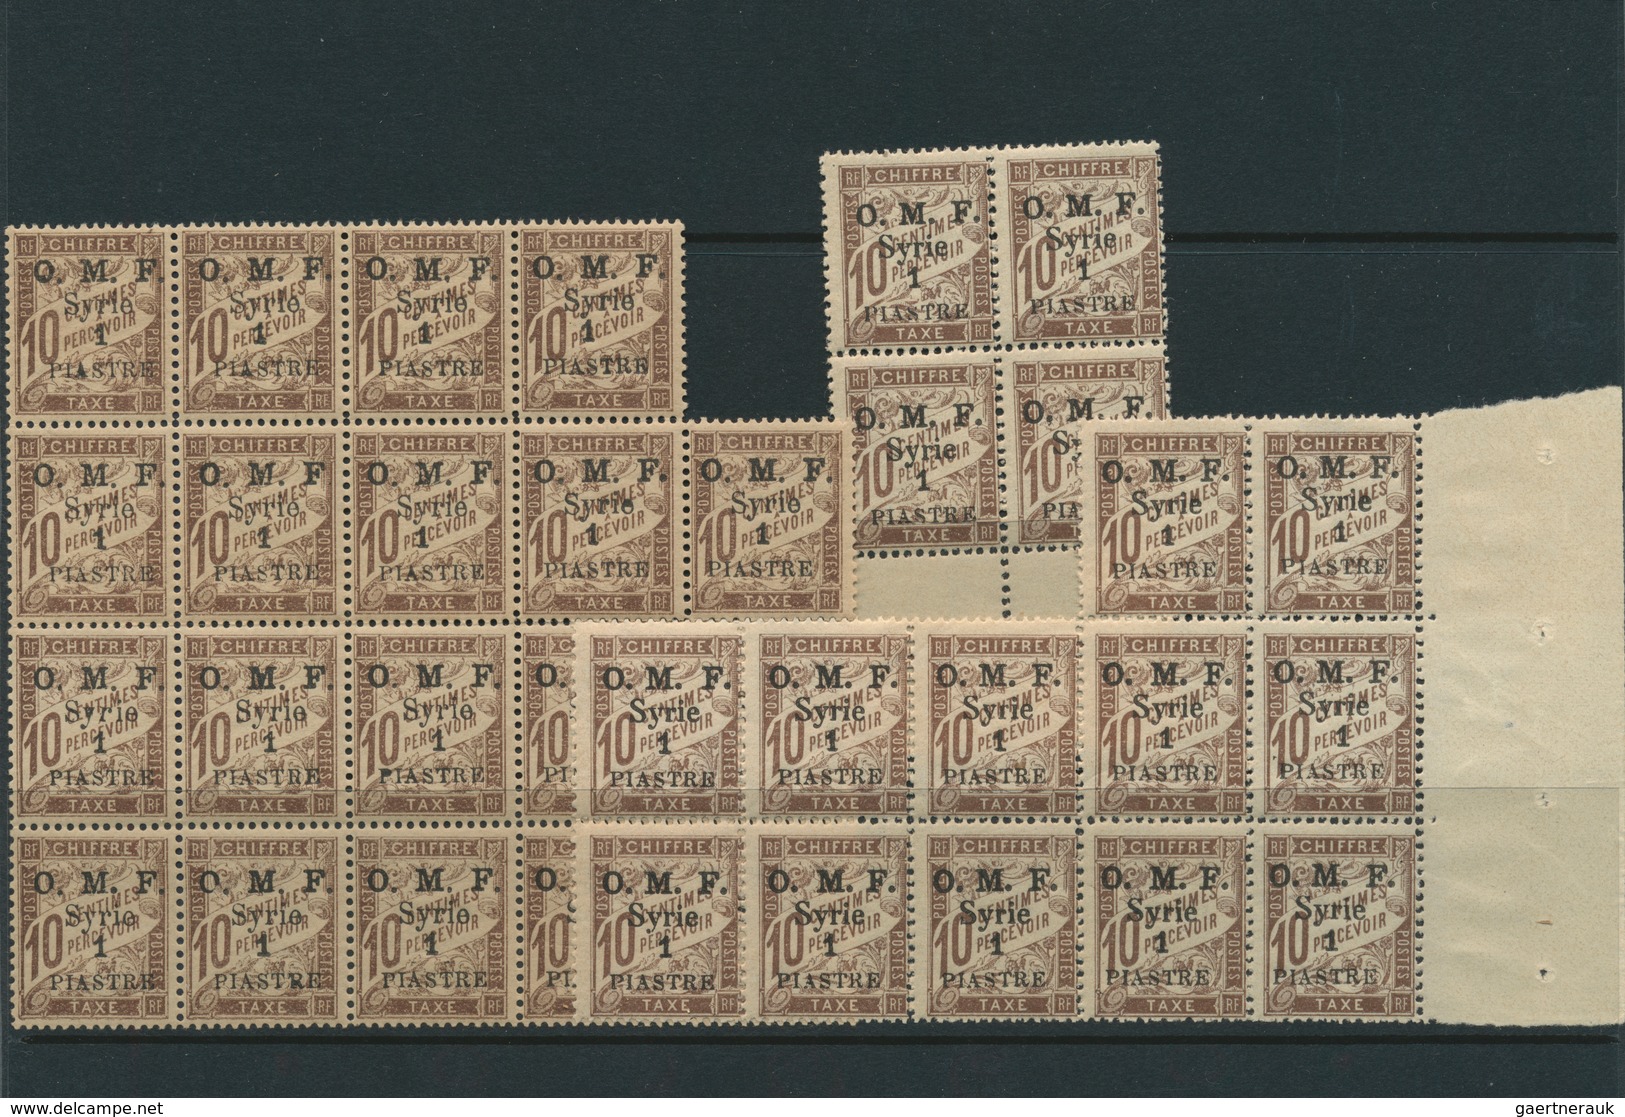 Syrien - Portomarken: 1920/1924, u/m assortment of different issues, mainly (larger) units. Maury 7.